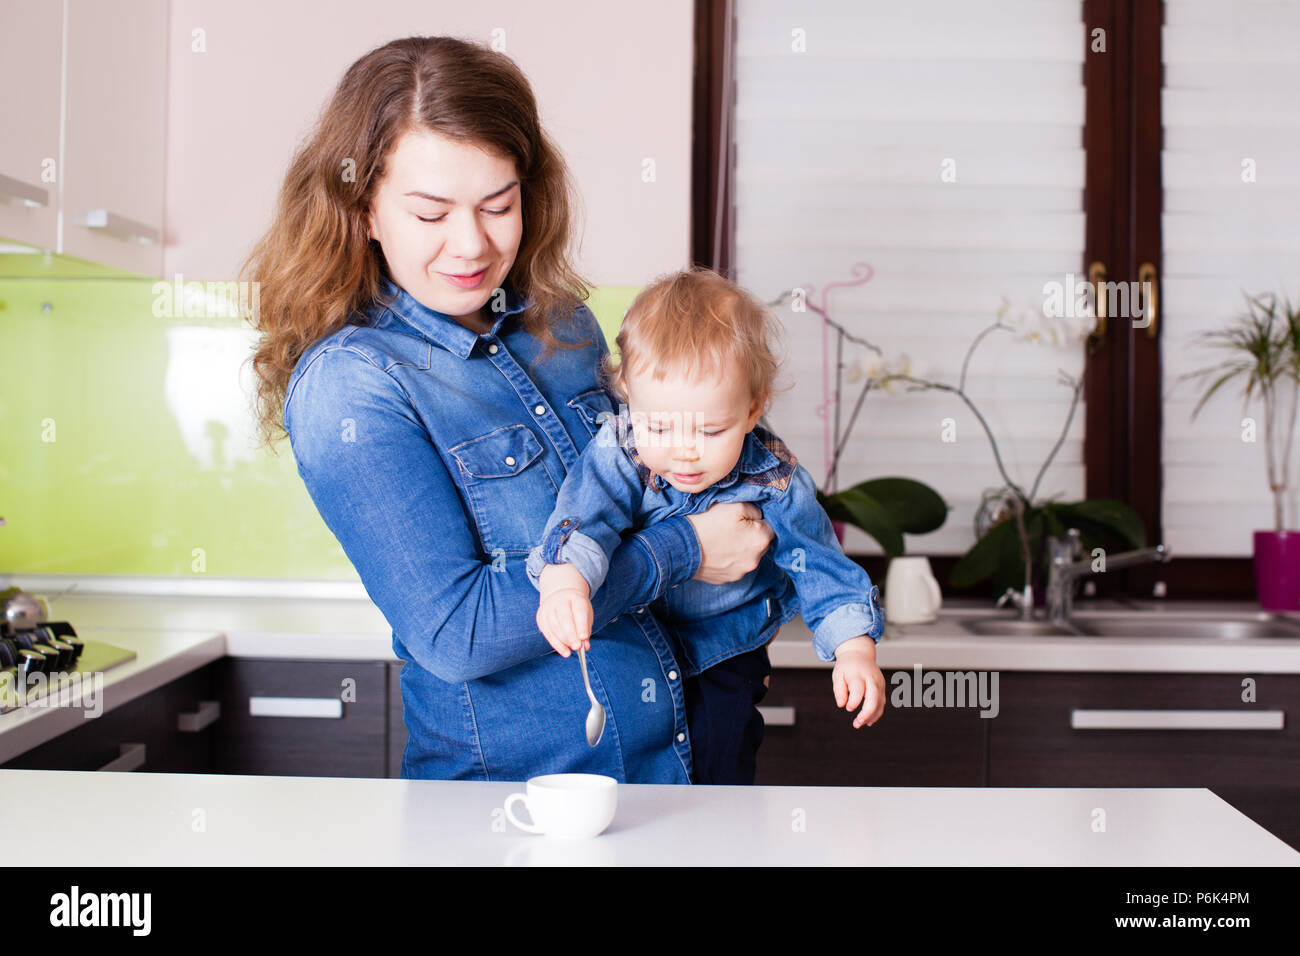 Cute little baby trying to stirr coffee in the arms of his mother Stock Photo